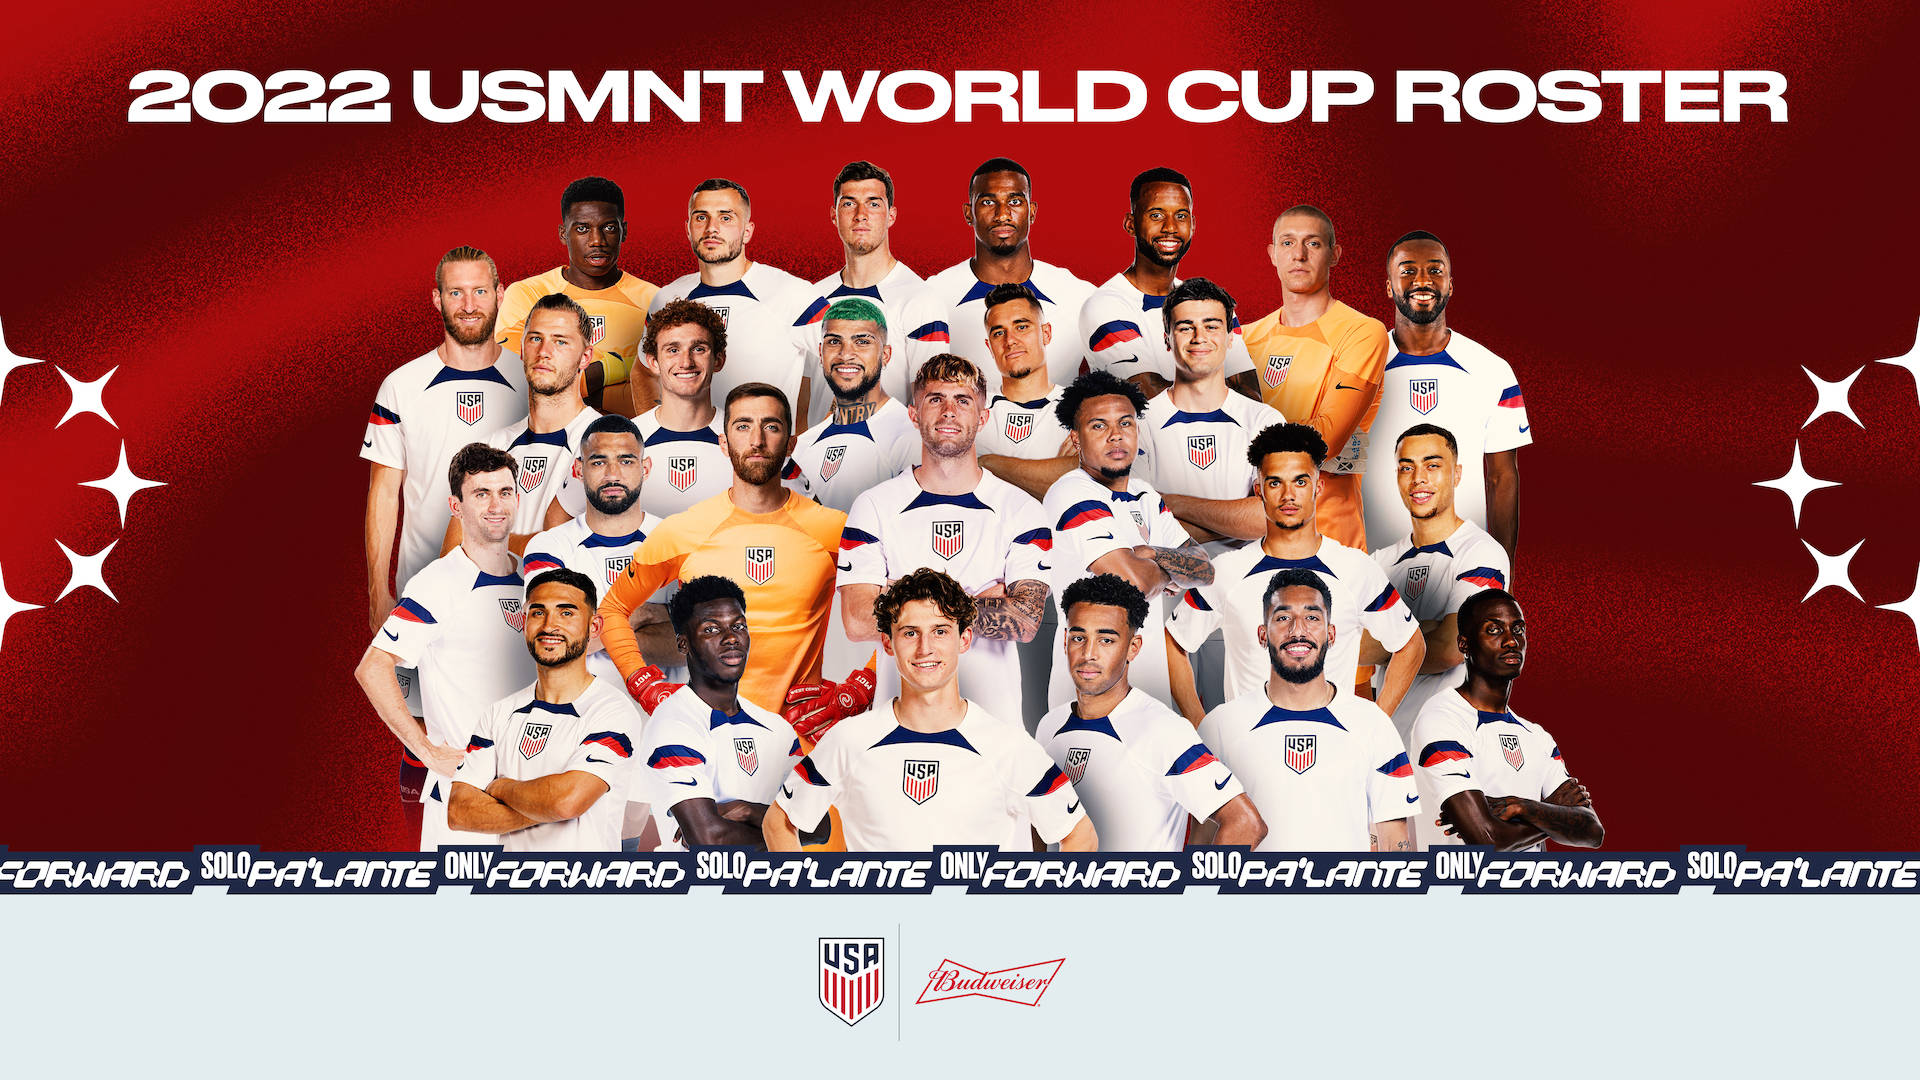 USA National Football Team Official World Cup Roster Wallpaper